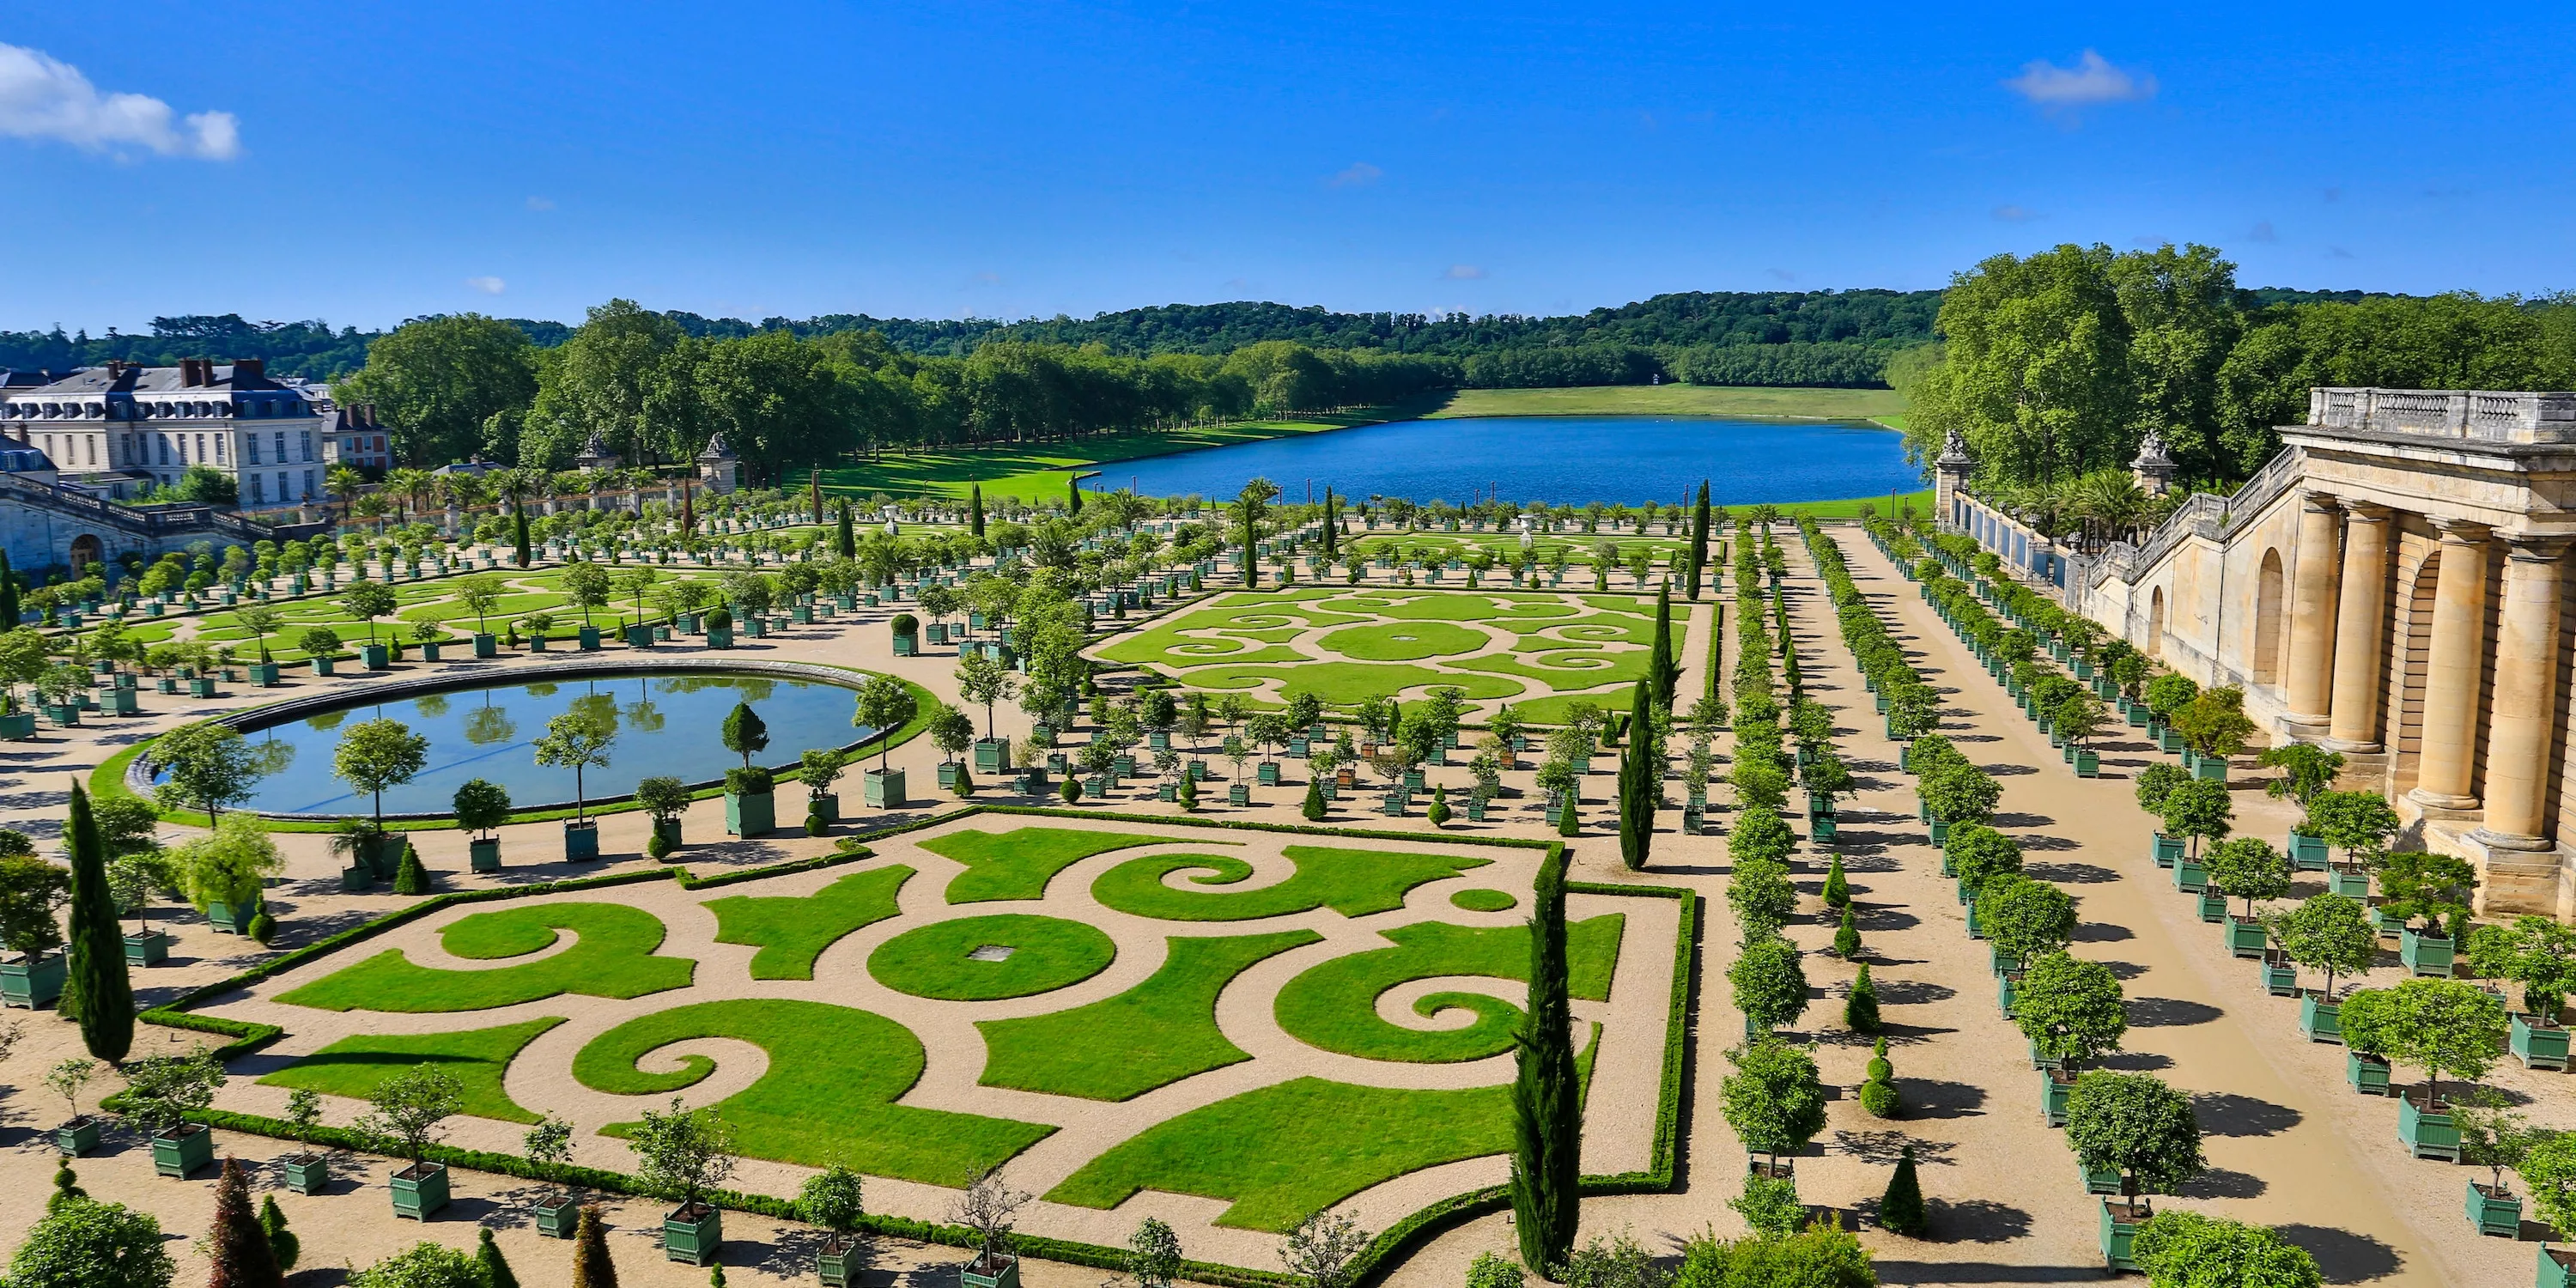 Gardens and Park of Versailles in France, Europe | Parks,Gardens - Rated 4.3